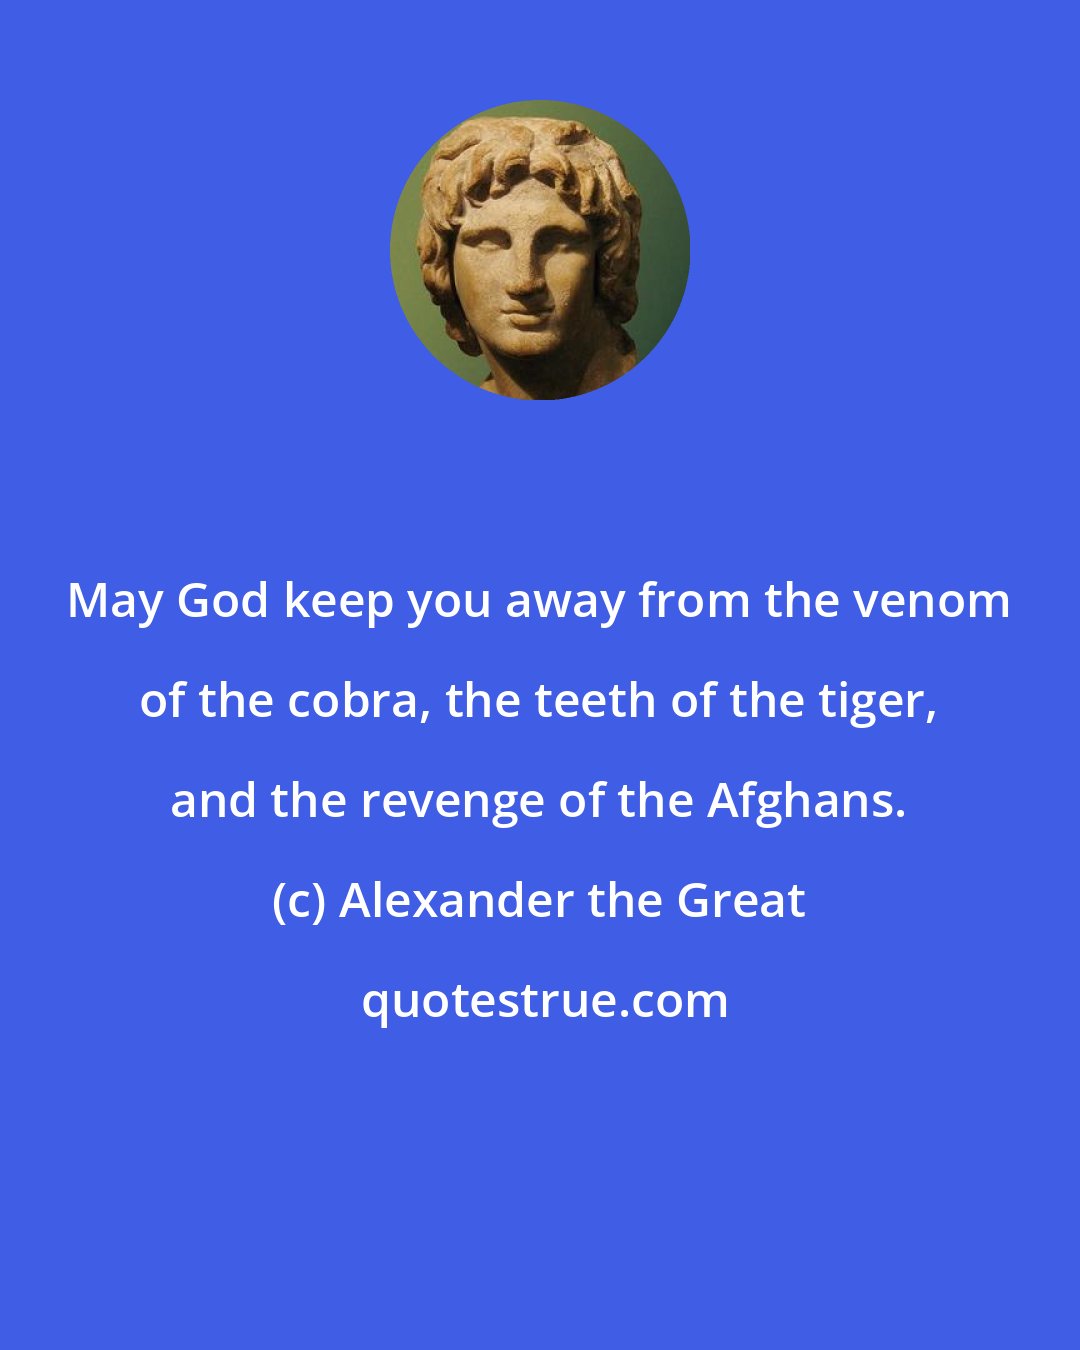 Alexander the Great: May God keep you away from the venom of the cobra, the teeth of the tiger, and the revenge of the Afghans.